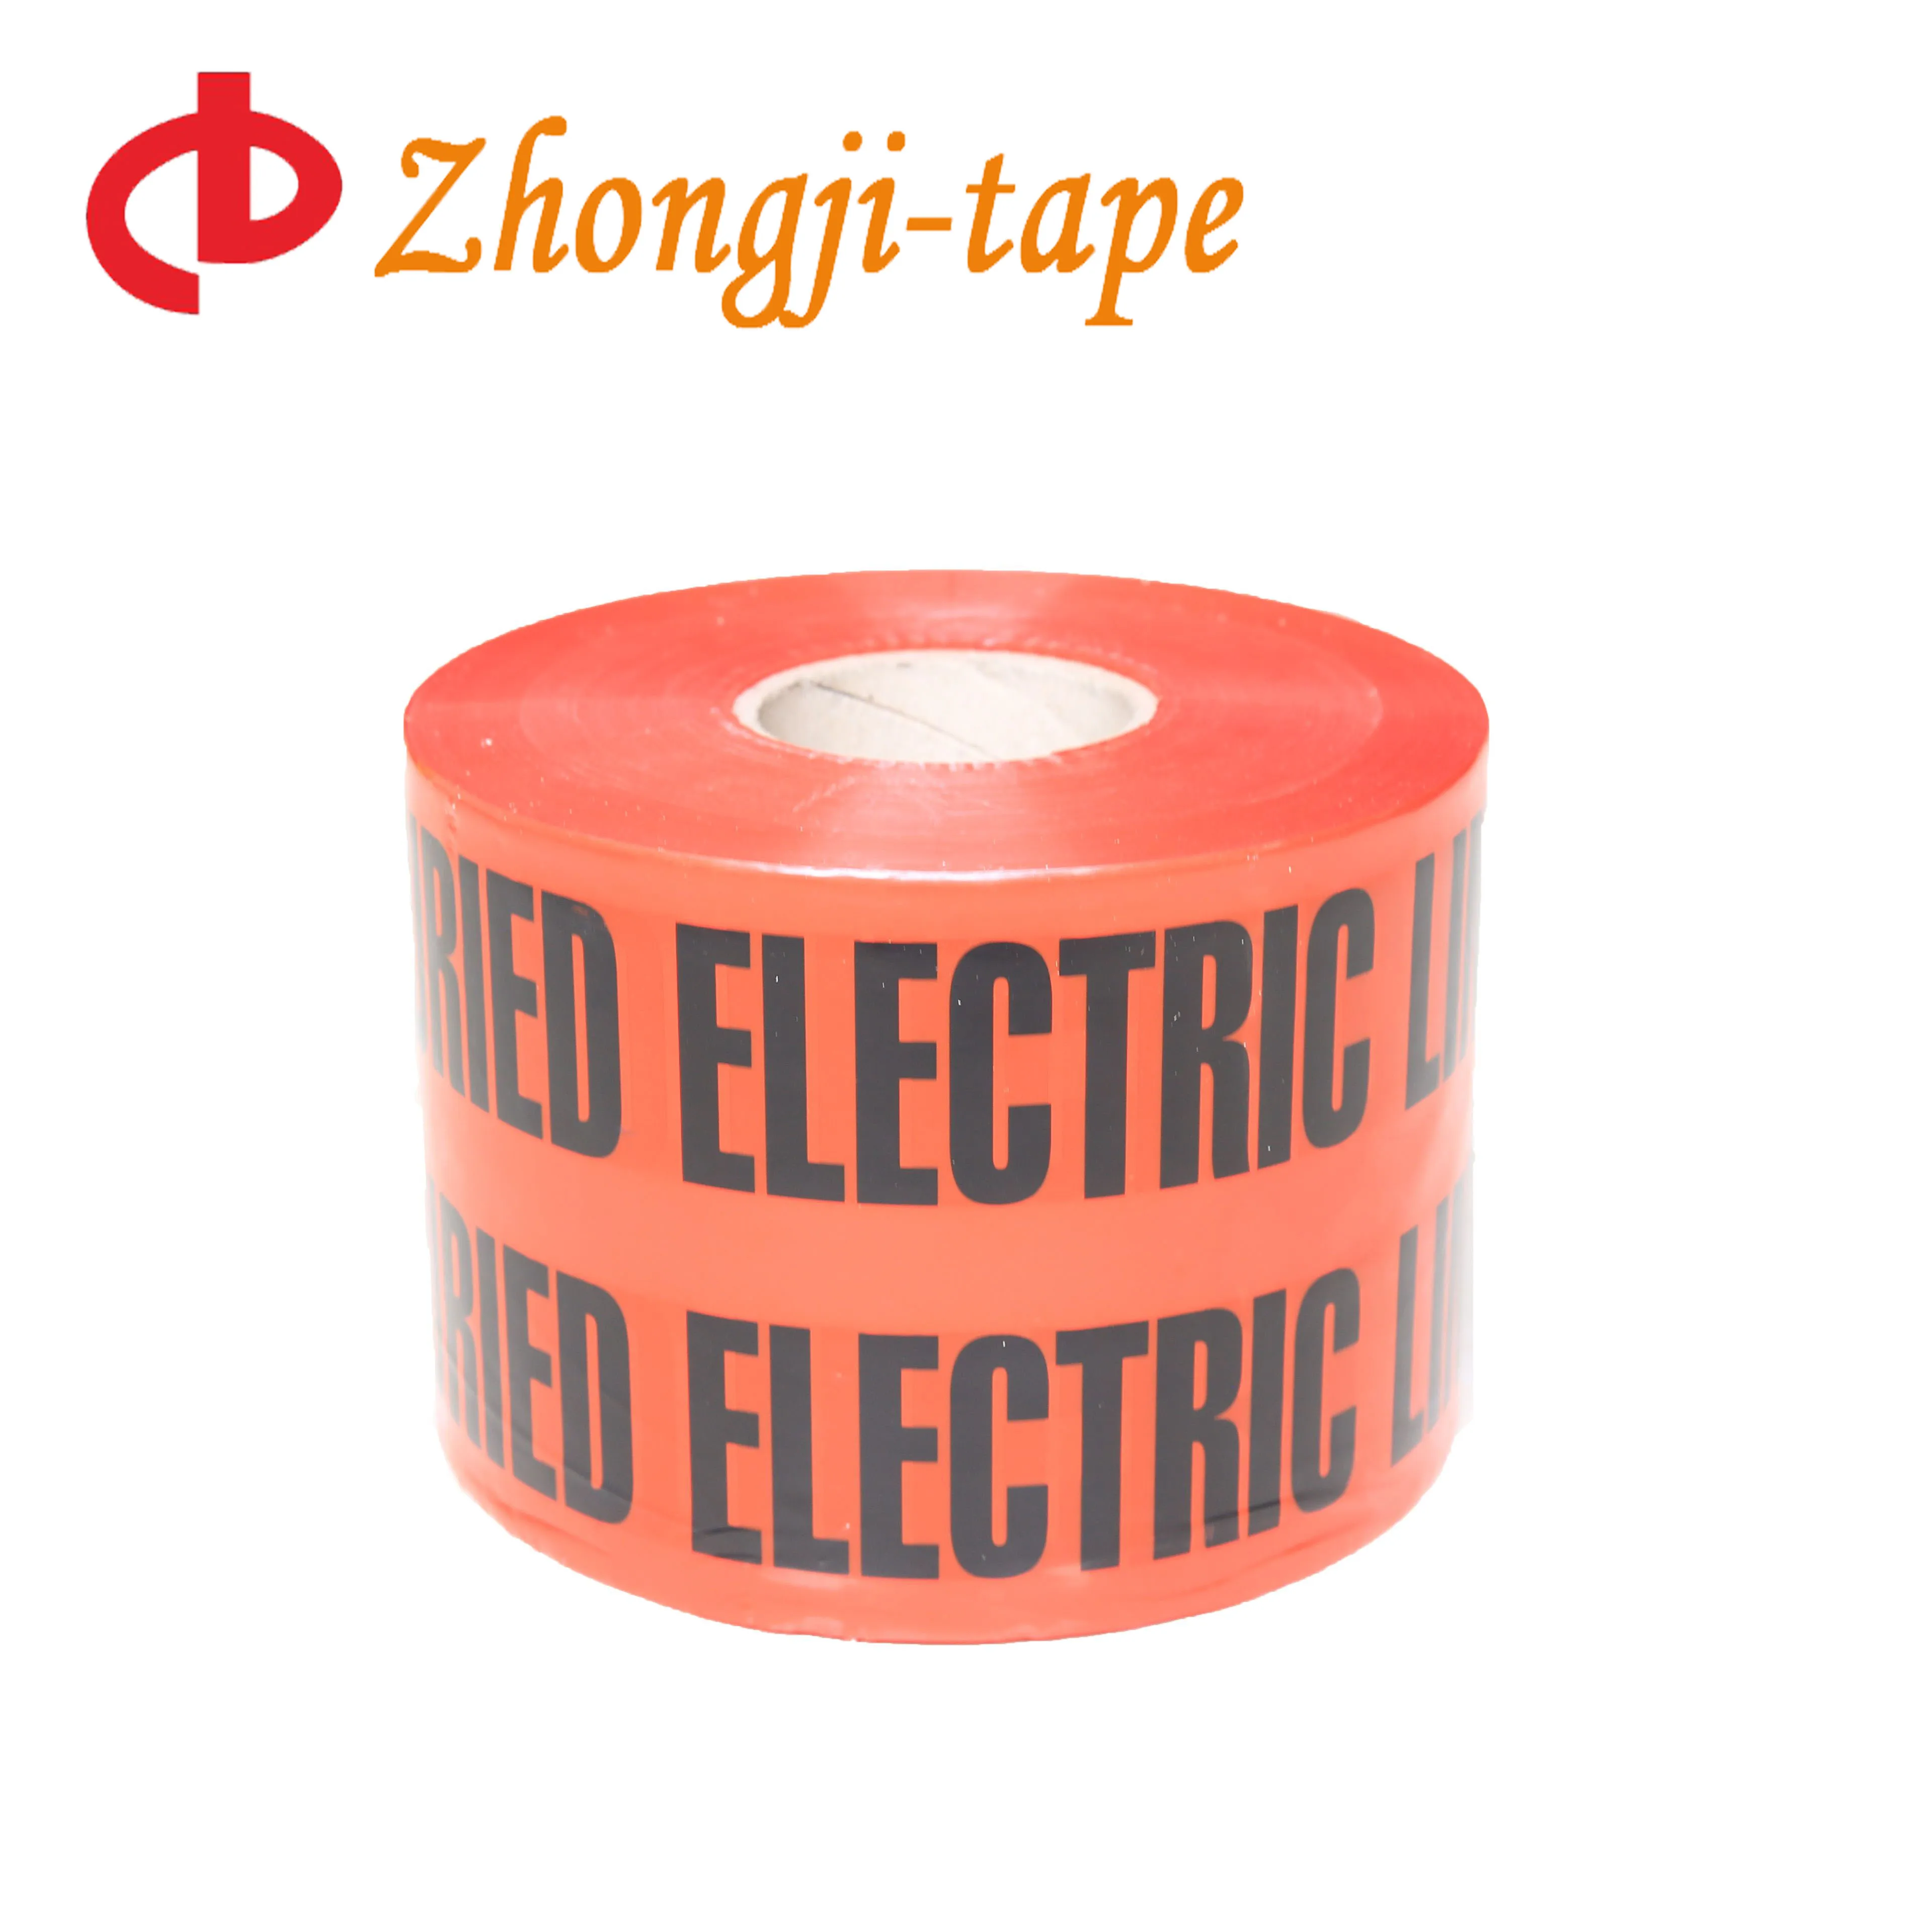 
Printed Utility Electrical Caution Line Underground Utility Marking Tape 